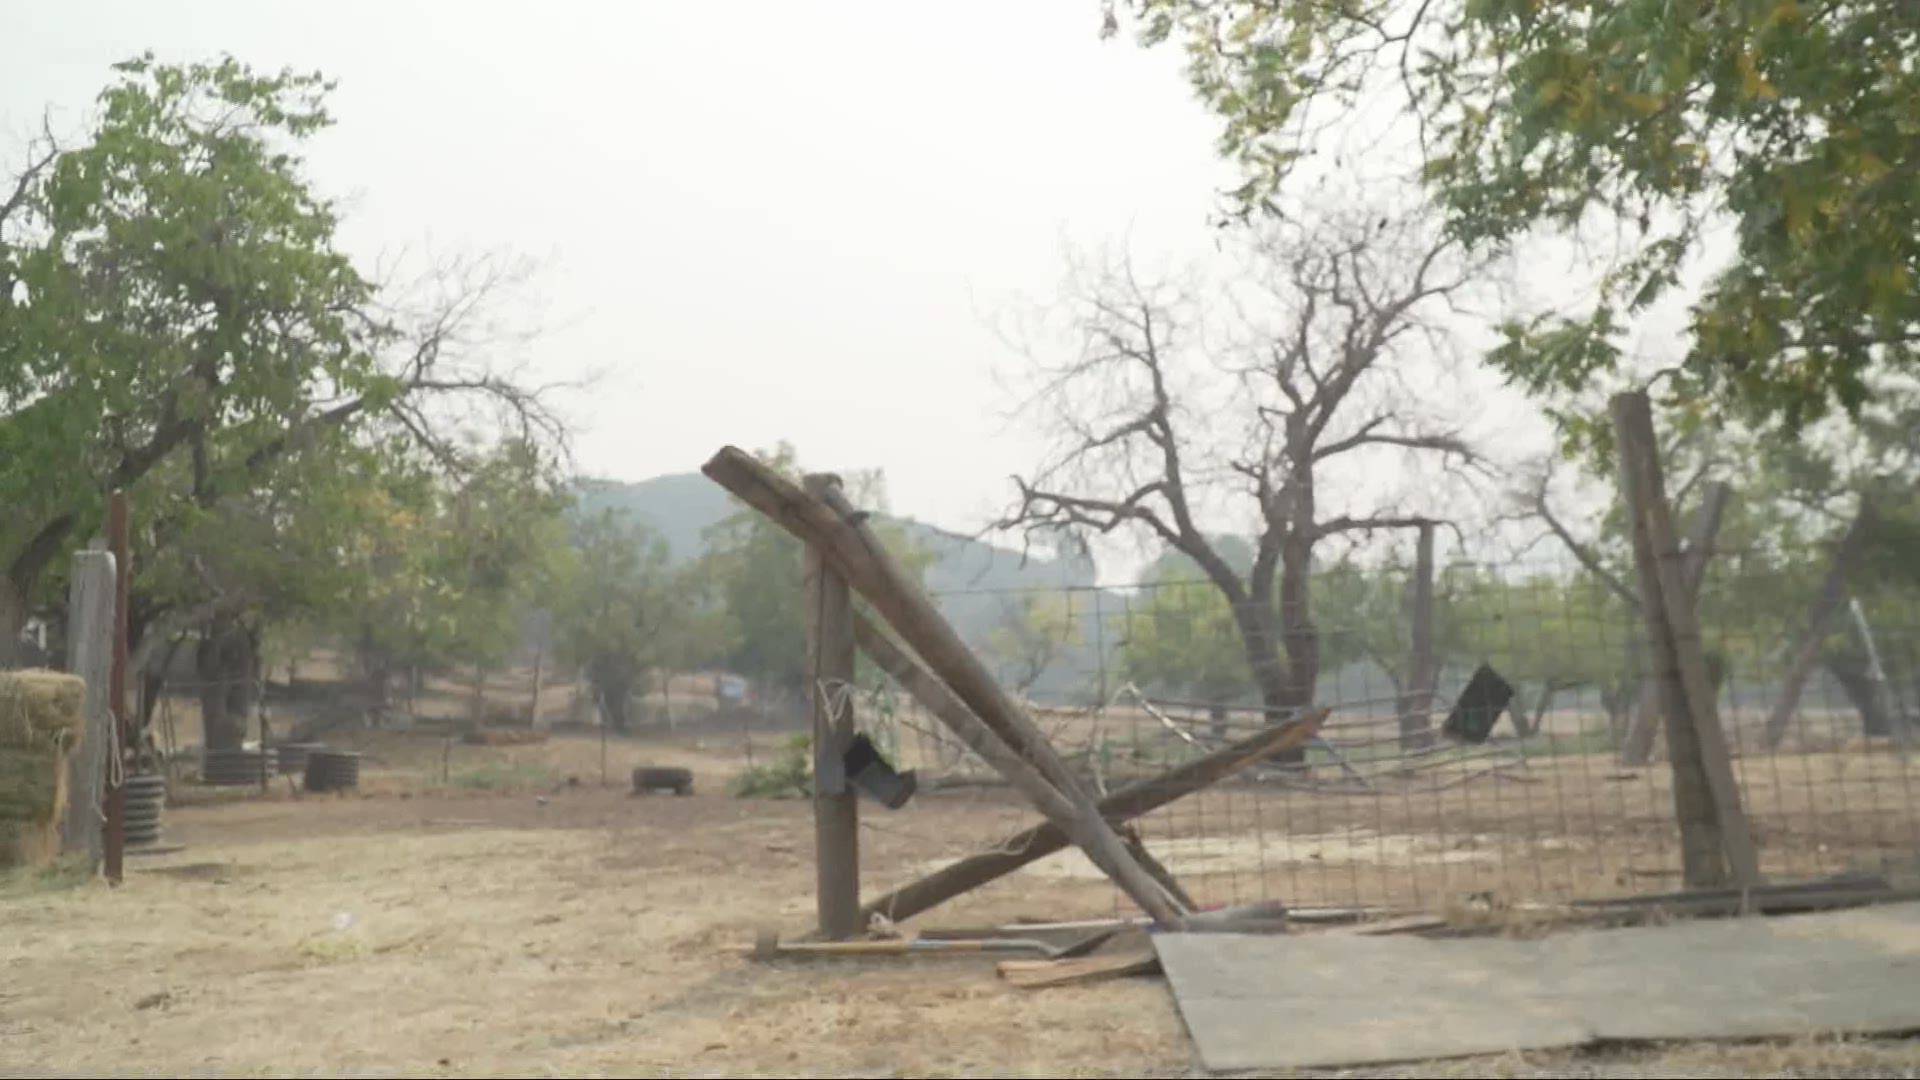 A homeowner says his cattle would not have survived if it wasn't for a bull that broke through the fence while the fires were threatening them.